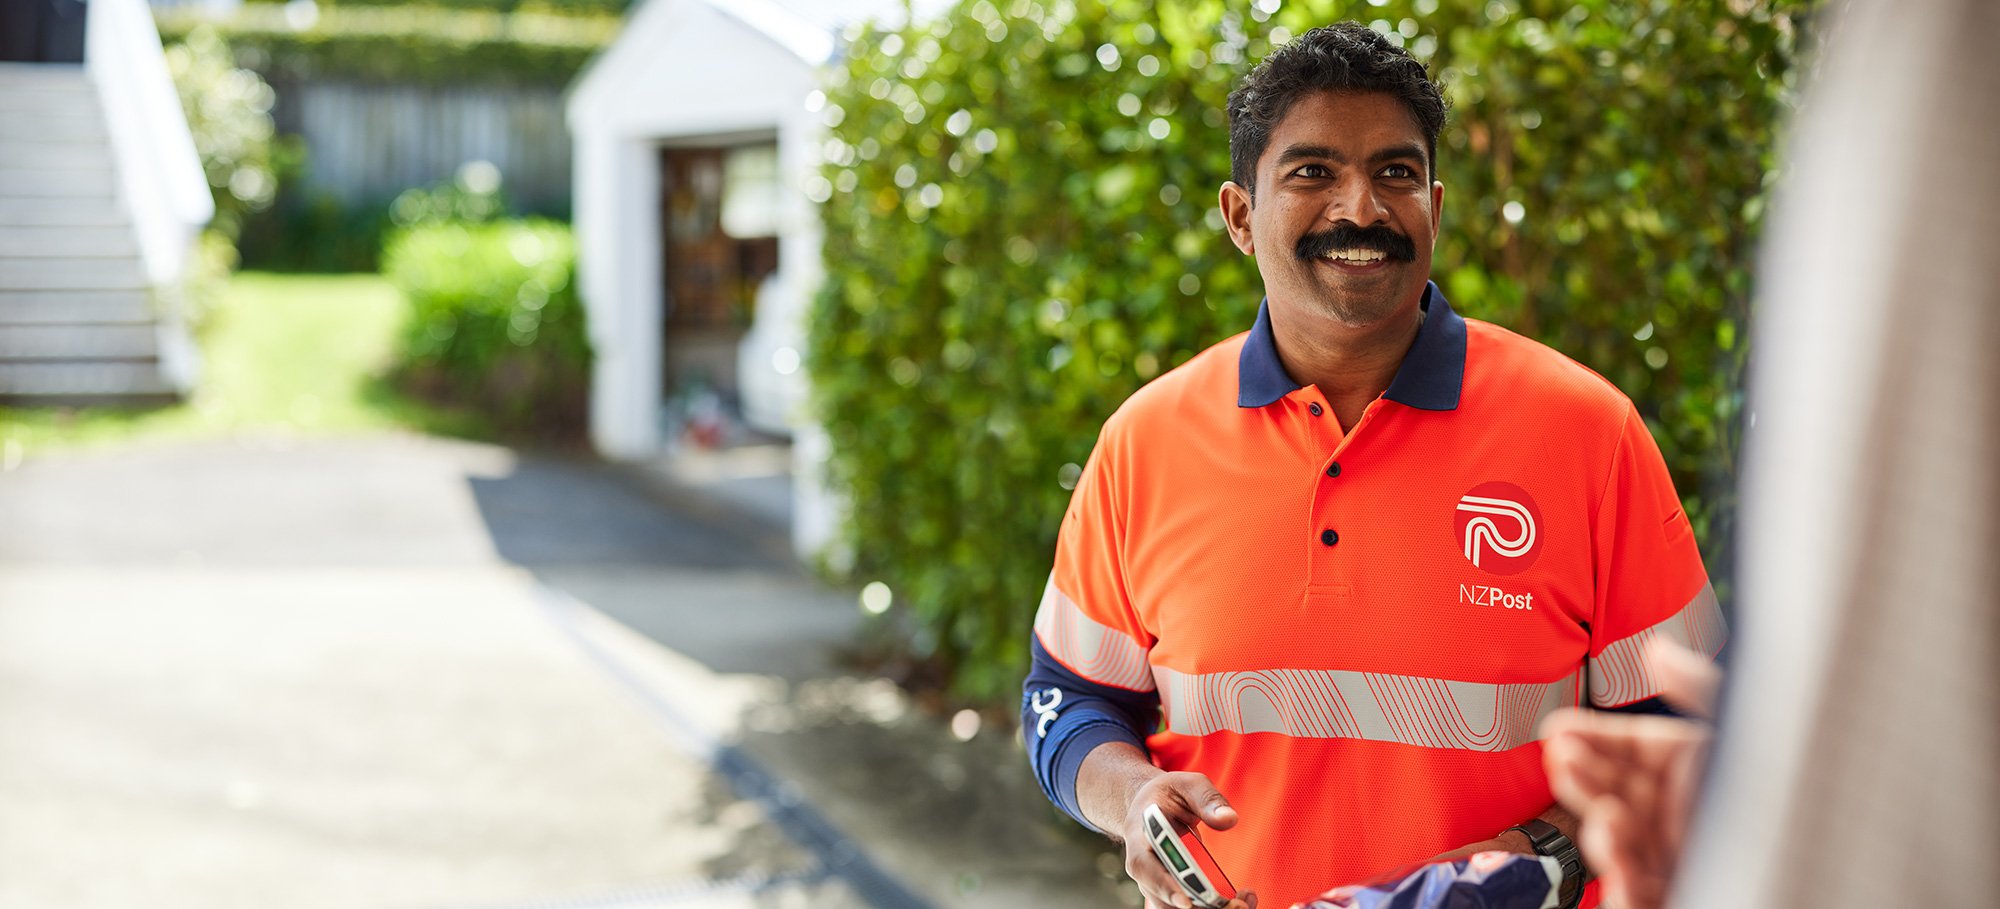 NZ-Post---Consumer-Delivery-September-2022-(Final-Selects)-15.jpg